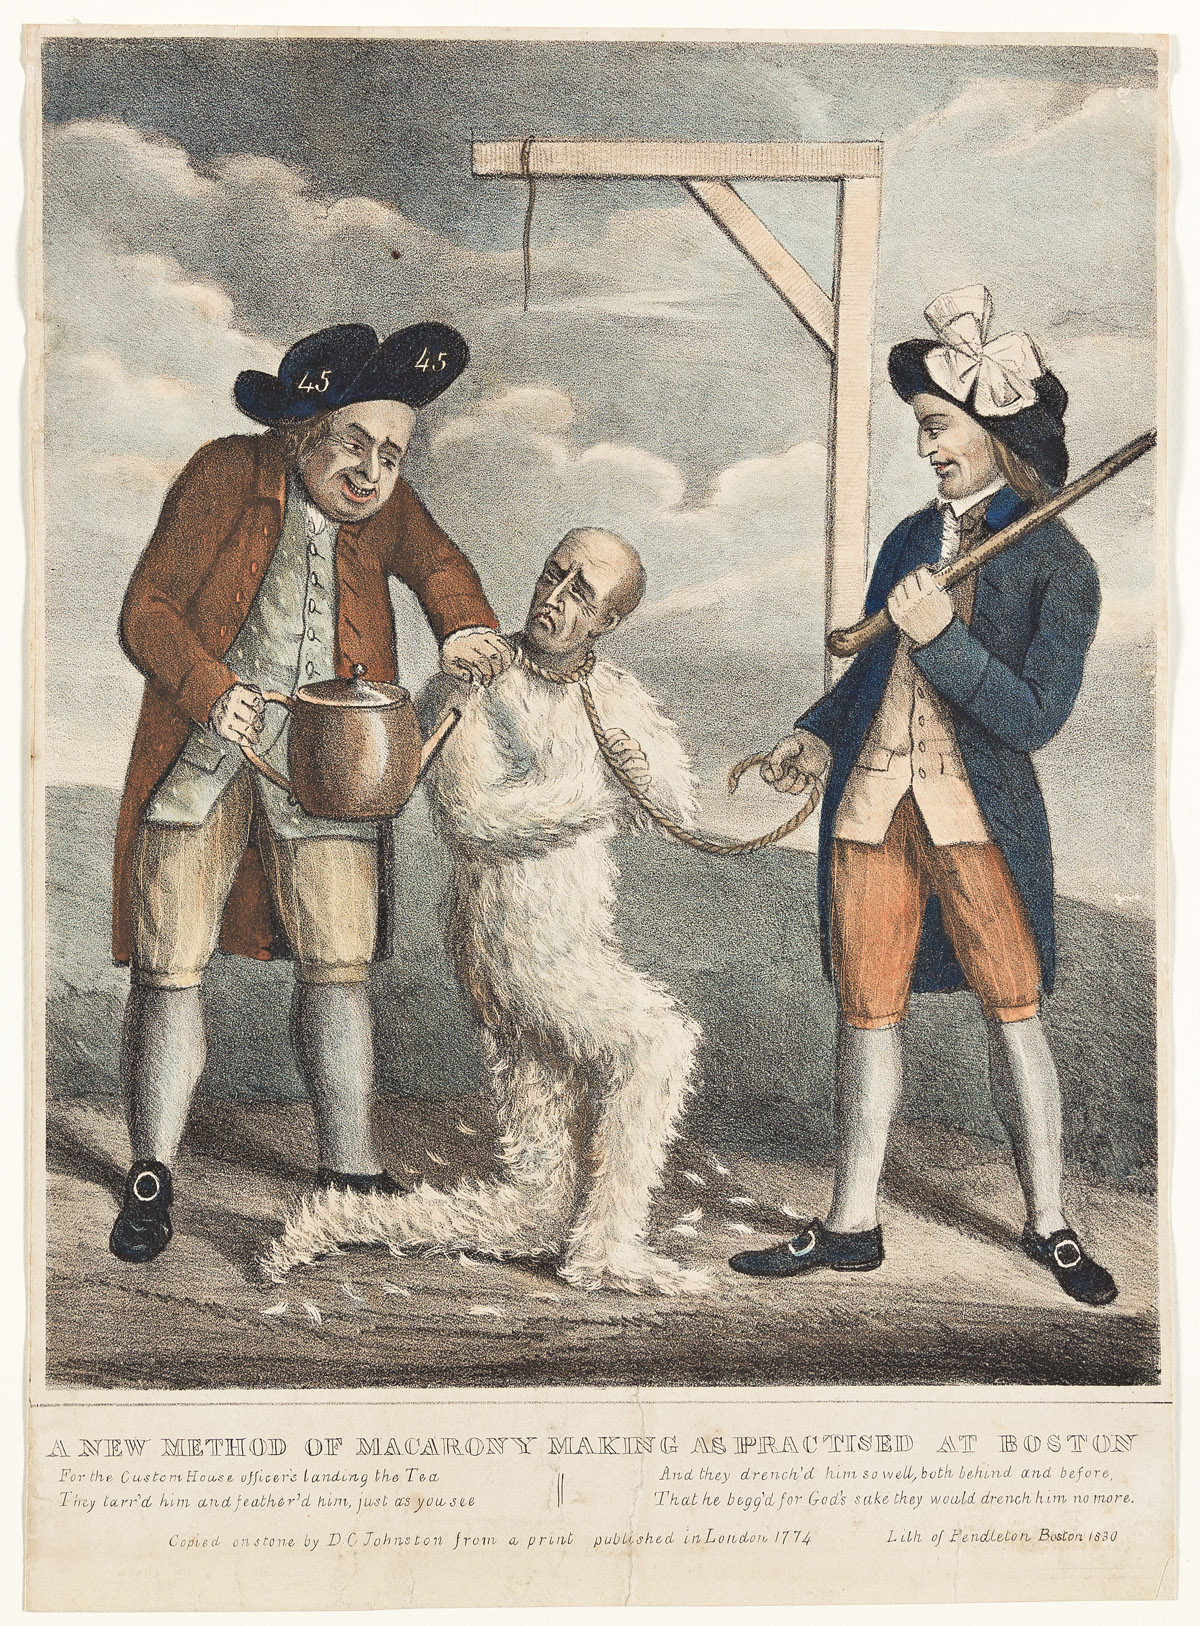 (AMERICAN REVOLUTION--PRINTS.) D.C. Johnston, lithographer. A New Method of Macarony Making, as Practised at Boston.